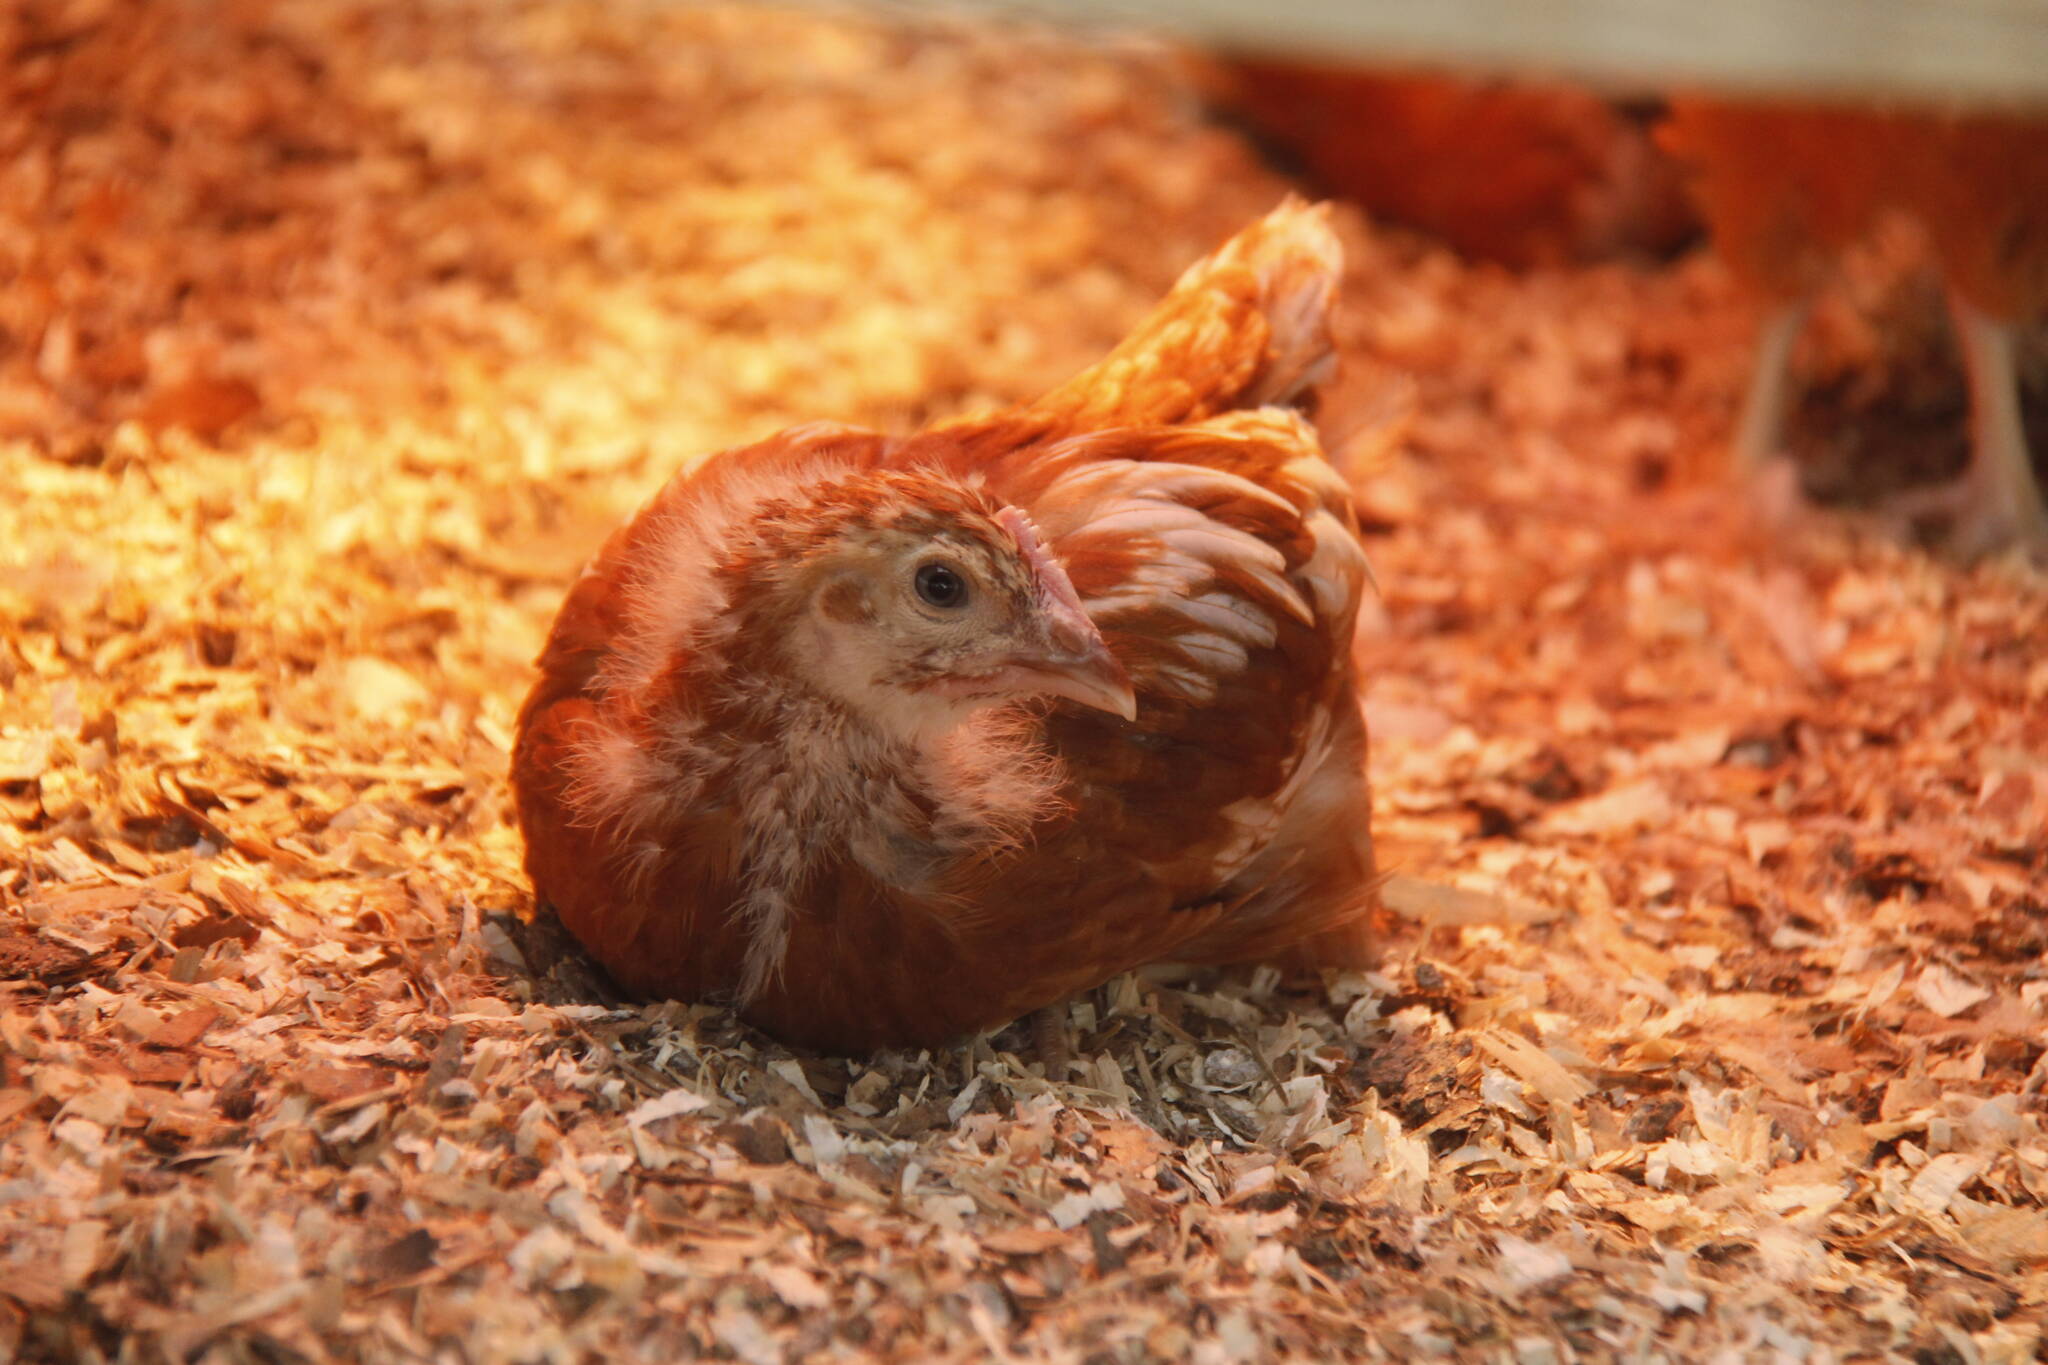 A chicken stays toasty under a heat lamp. (Photo by Kira Erickson/South Whidbey Record)